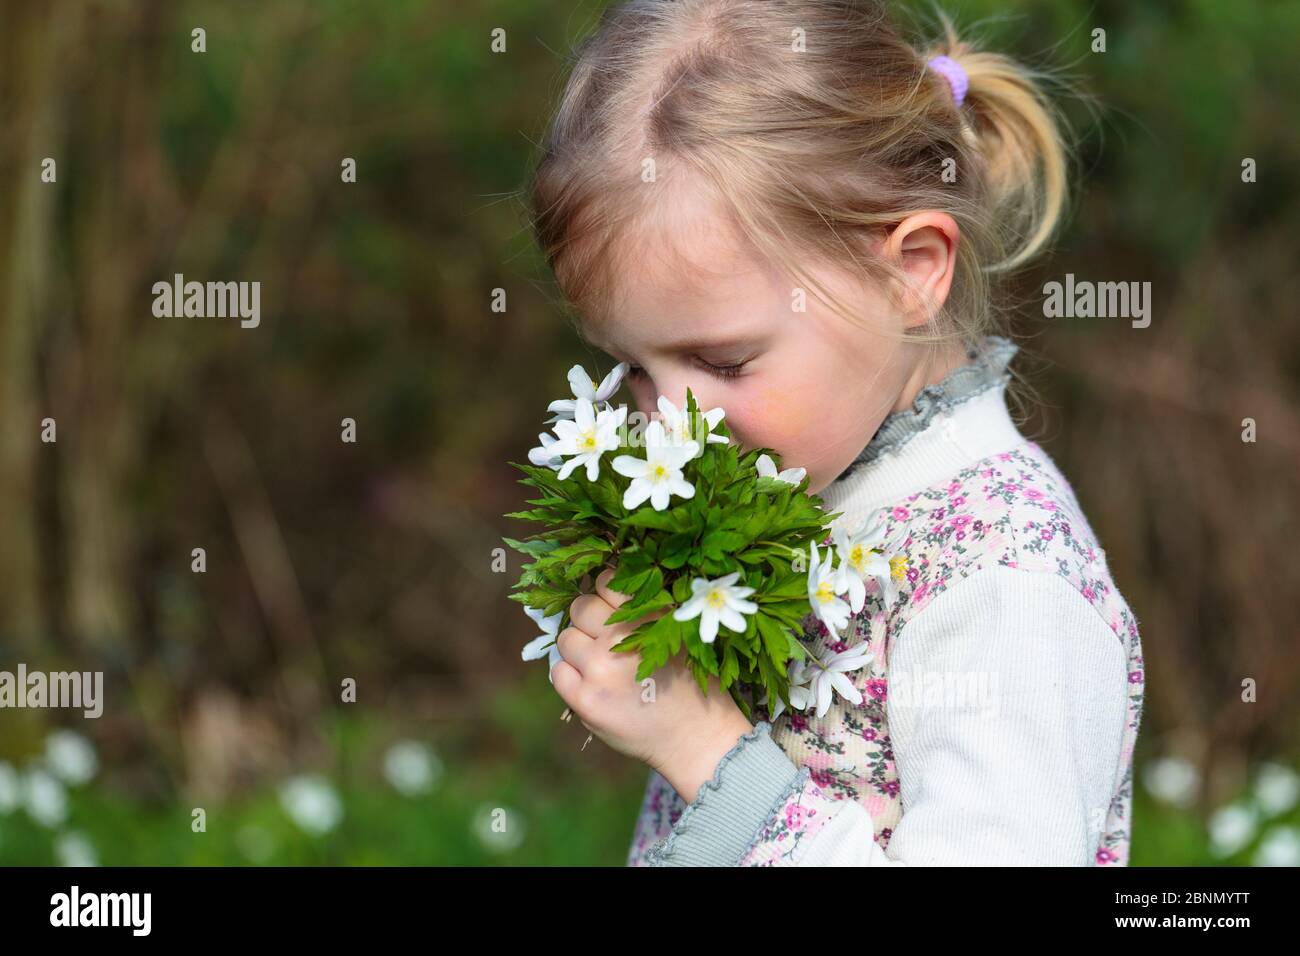 Young girl holding bunch of wild Wood anemones (Anemone nemorosa) from forest, early spring in France. Model released Stock Photo